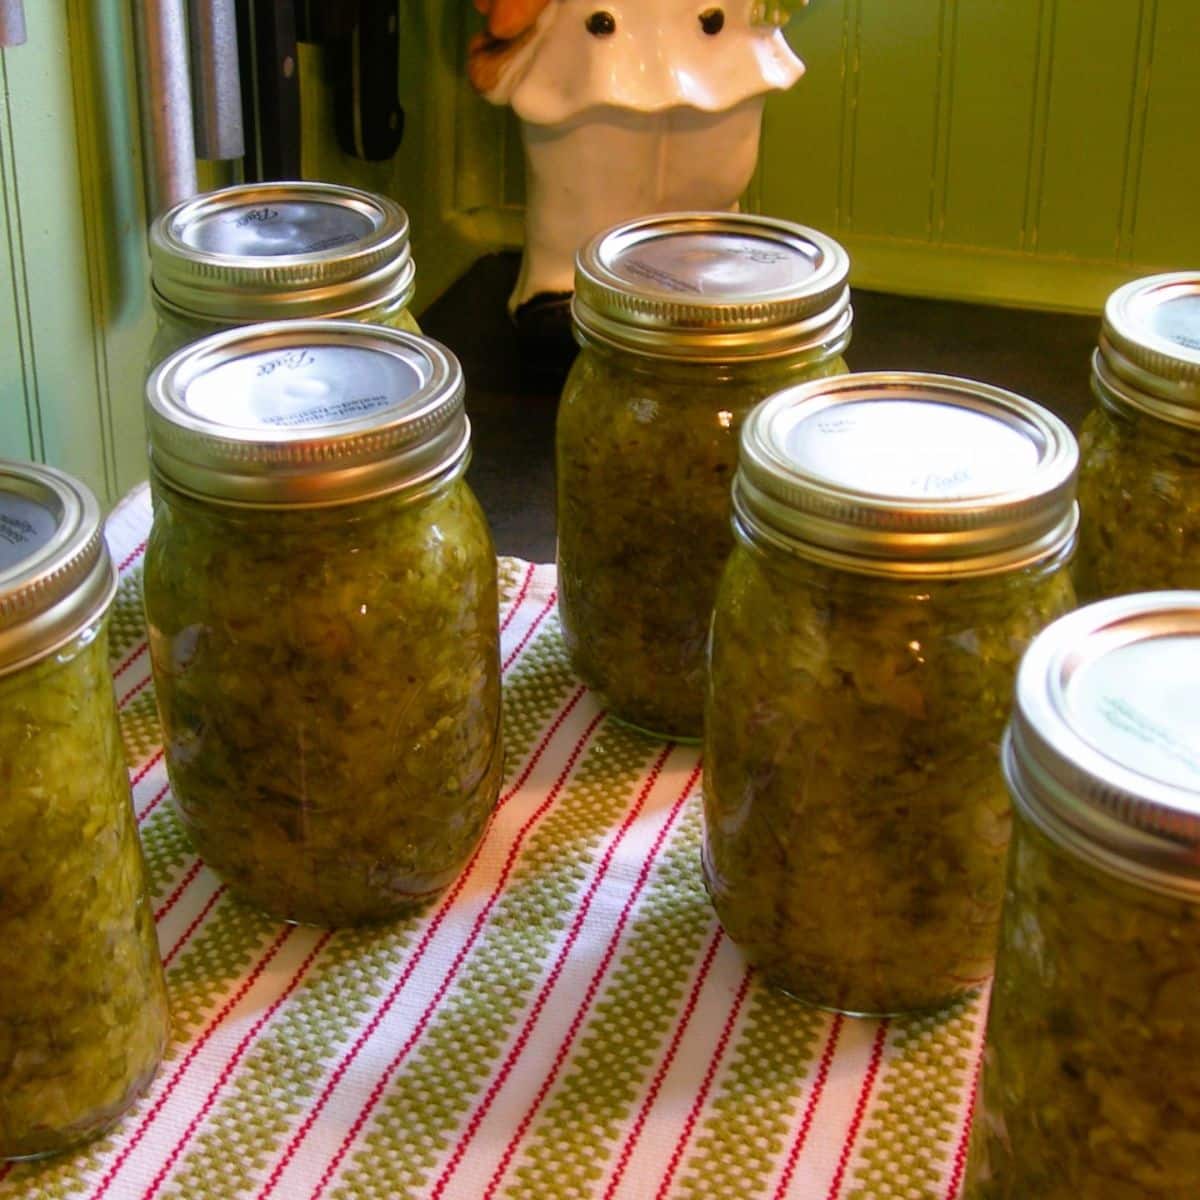 Homemade dill relish in glass jars.